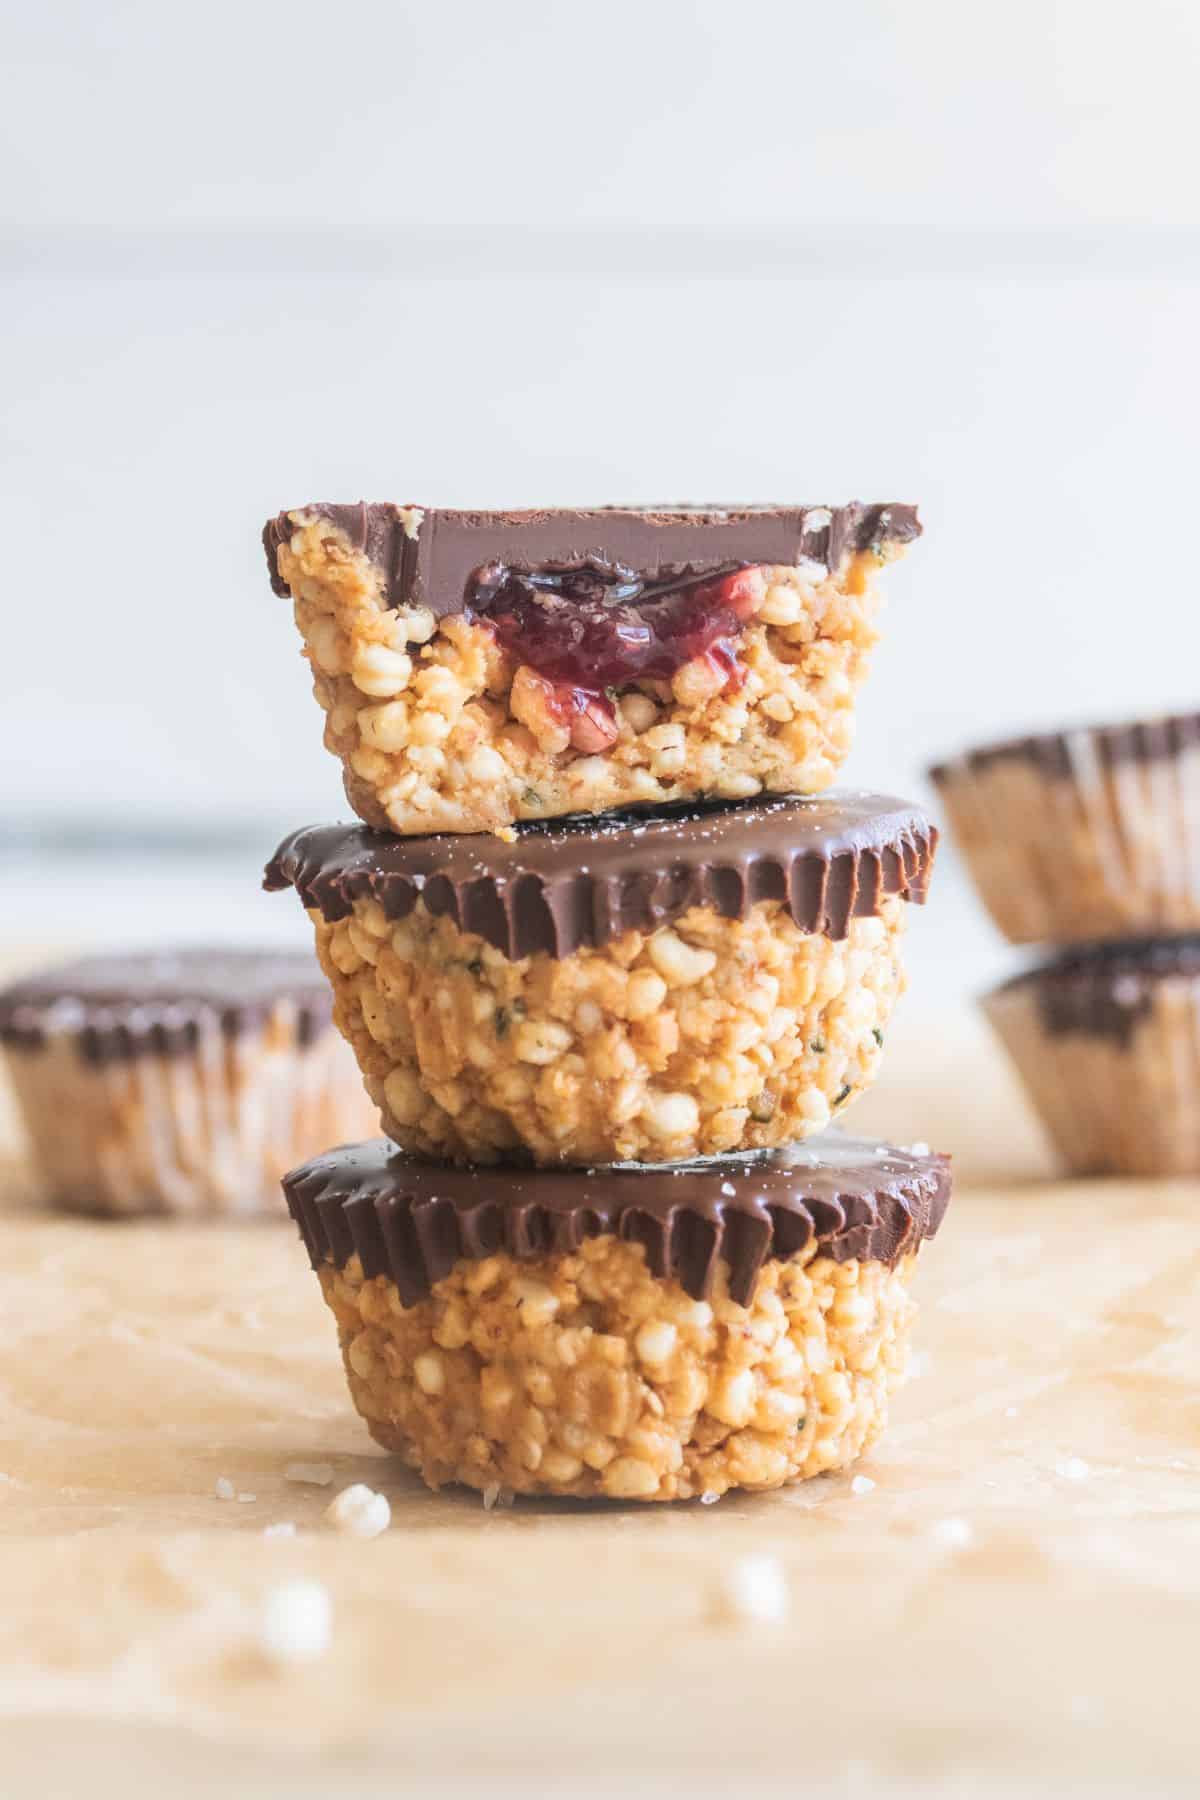 Three quinoa bites stacked on top of each other on a parchment paper with others staged around with a bite out of the top one showing raspberry jam inside.